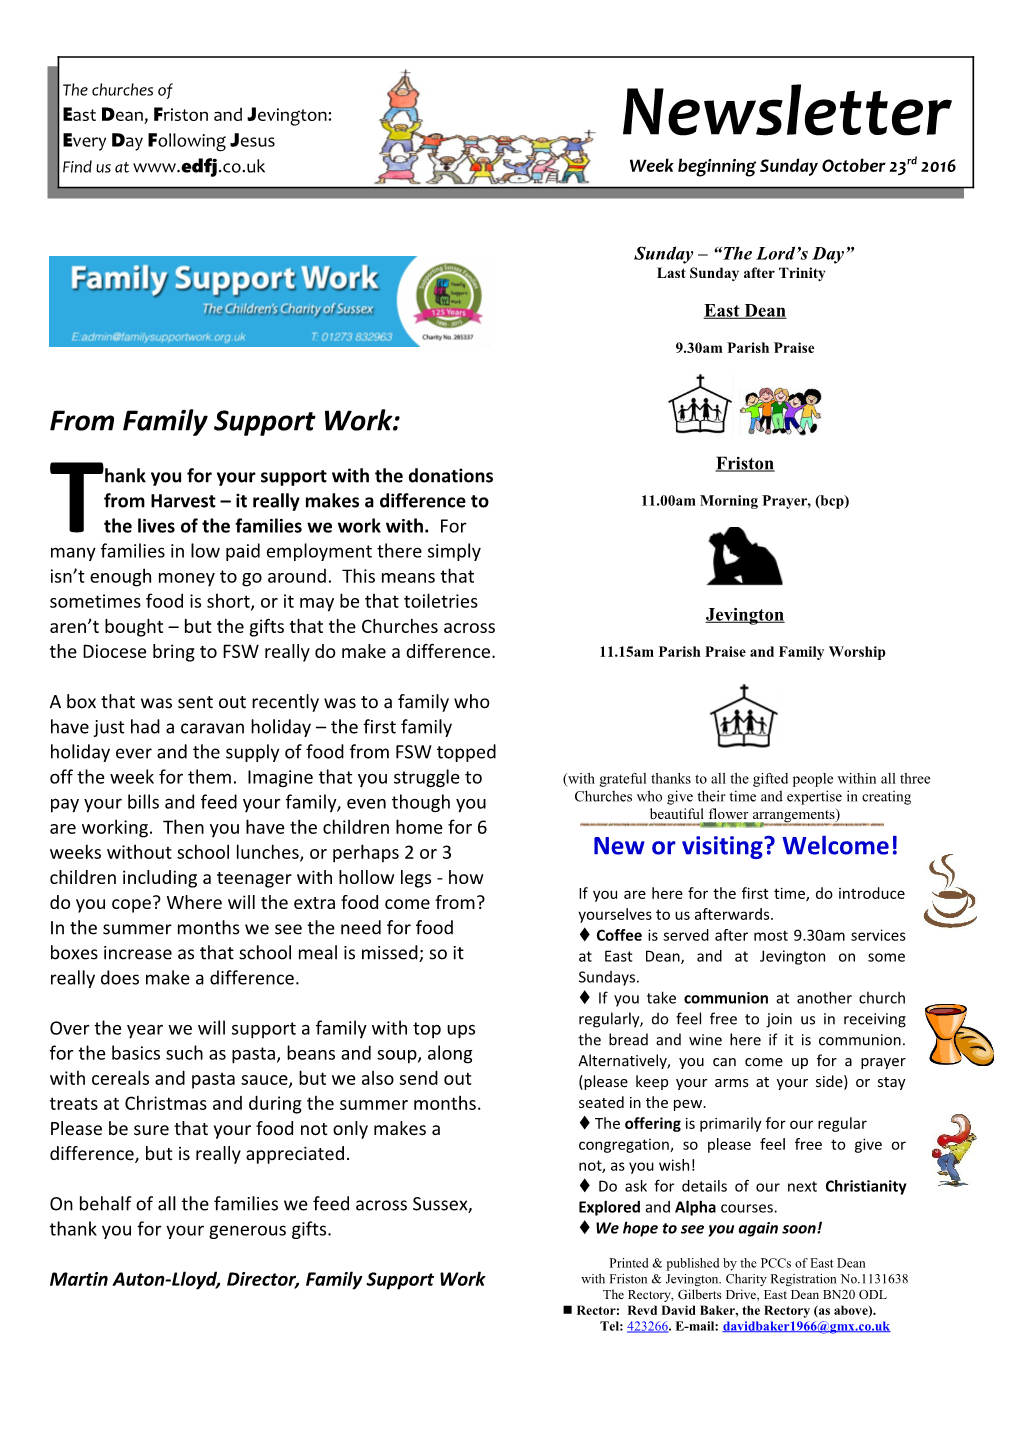 From Family Support Work